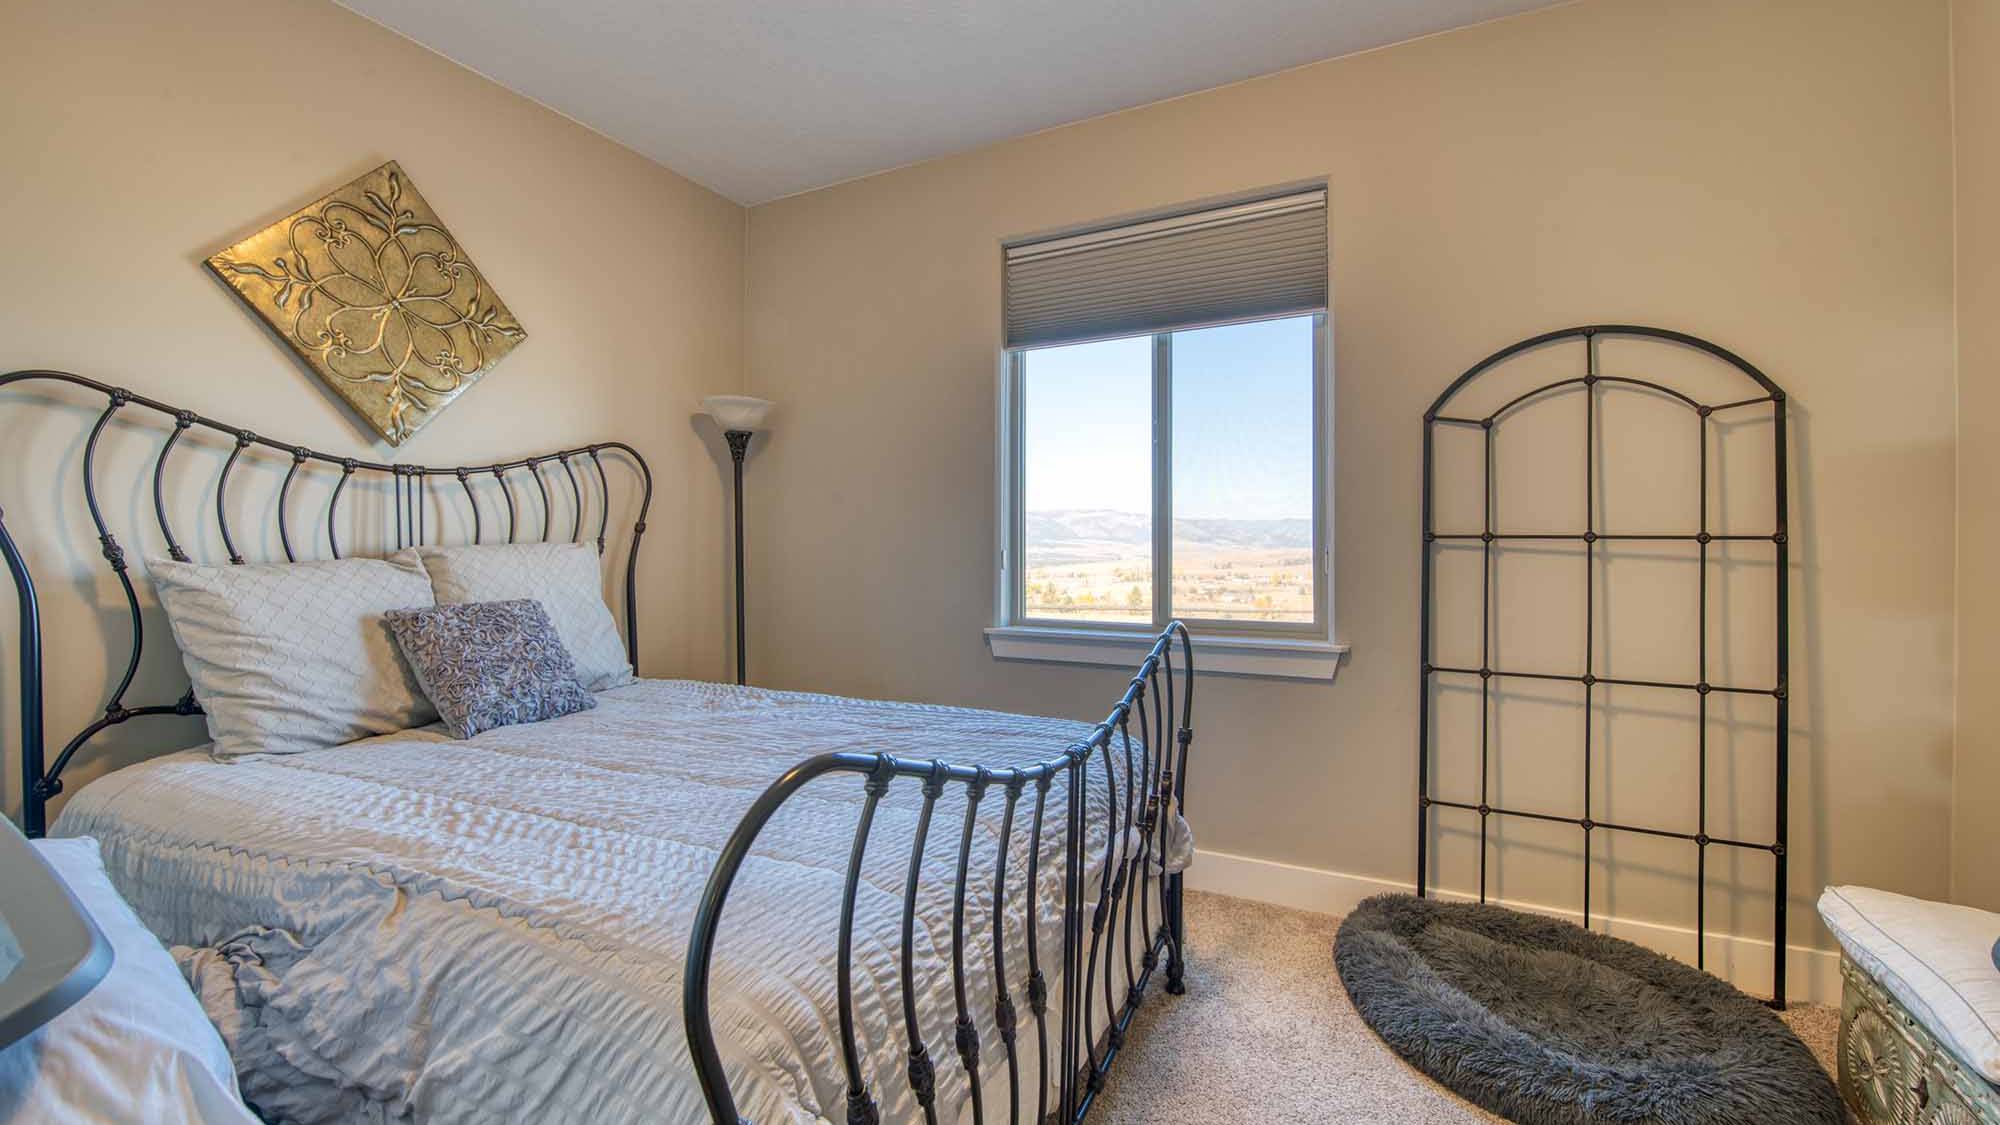 Guest bedroom in The Copper Creek model home - Built by Big Sky Builder in Florence, MT